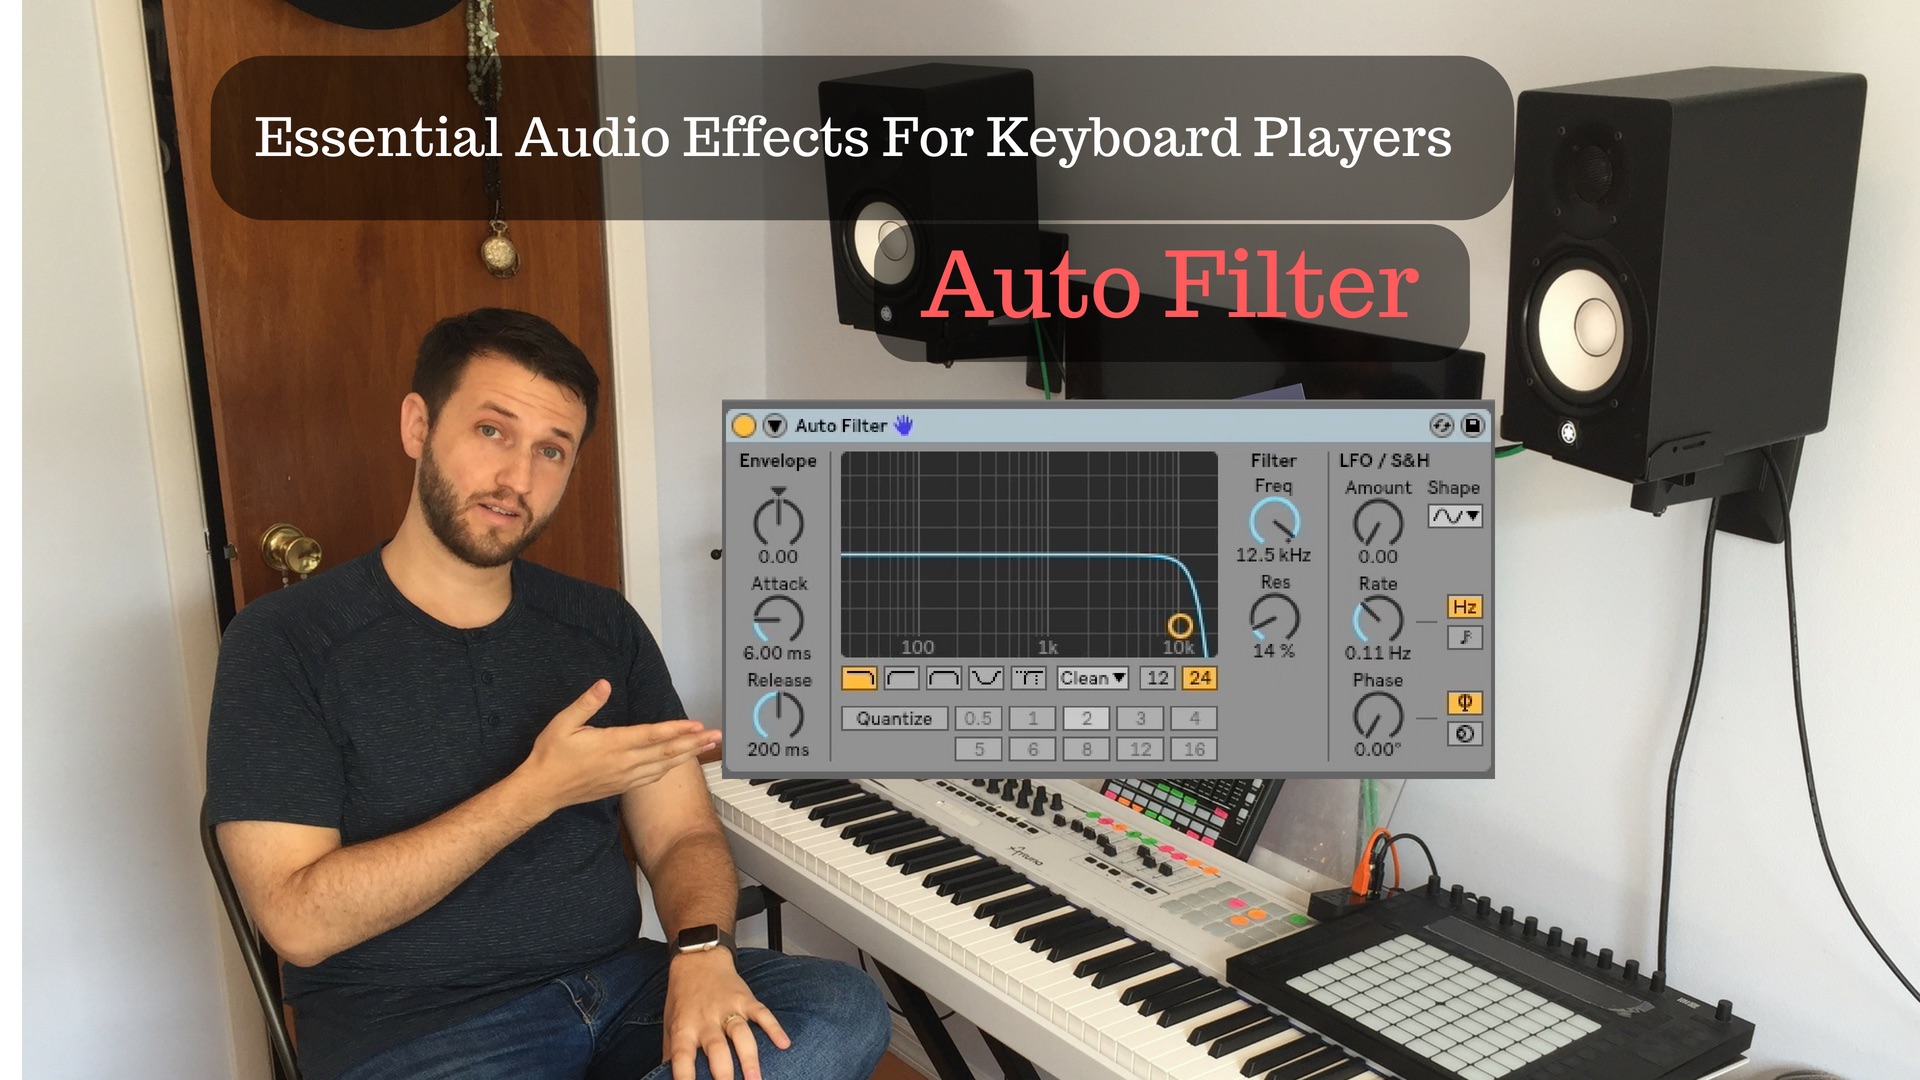 Lowpass Filter: Essential Audio Effects For Keyboard Players